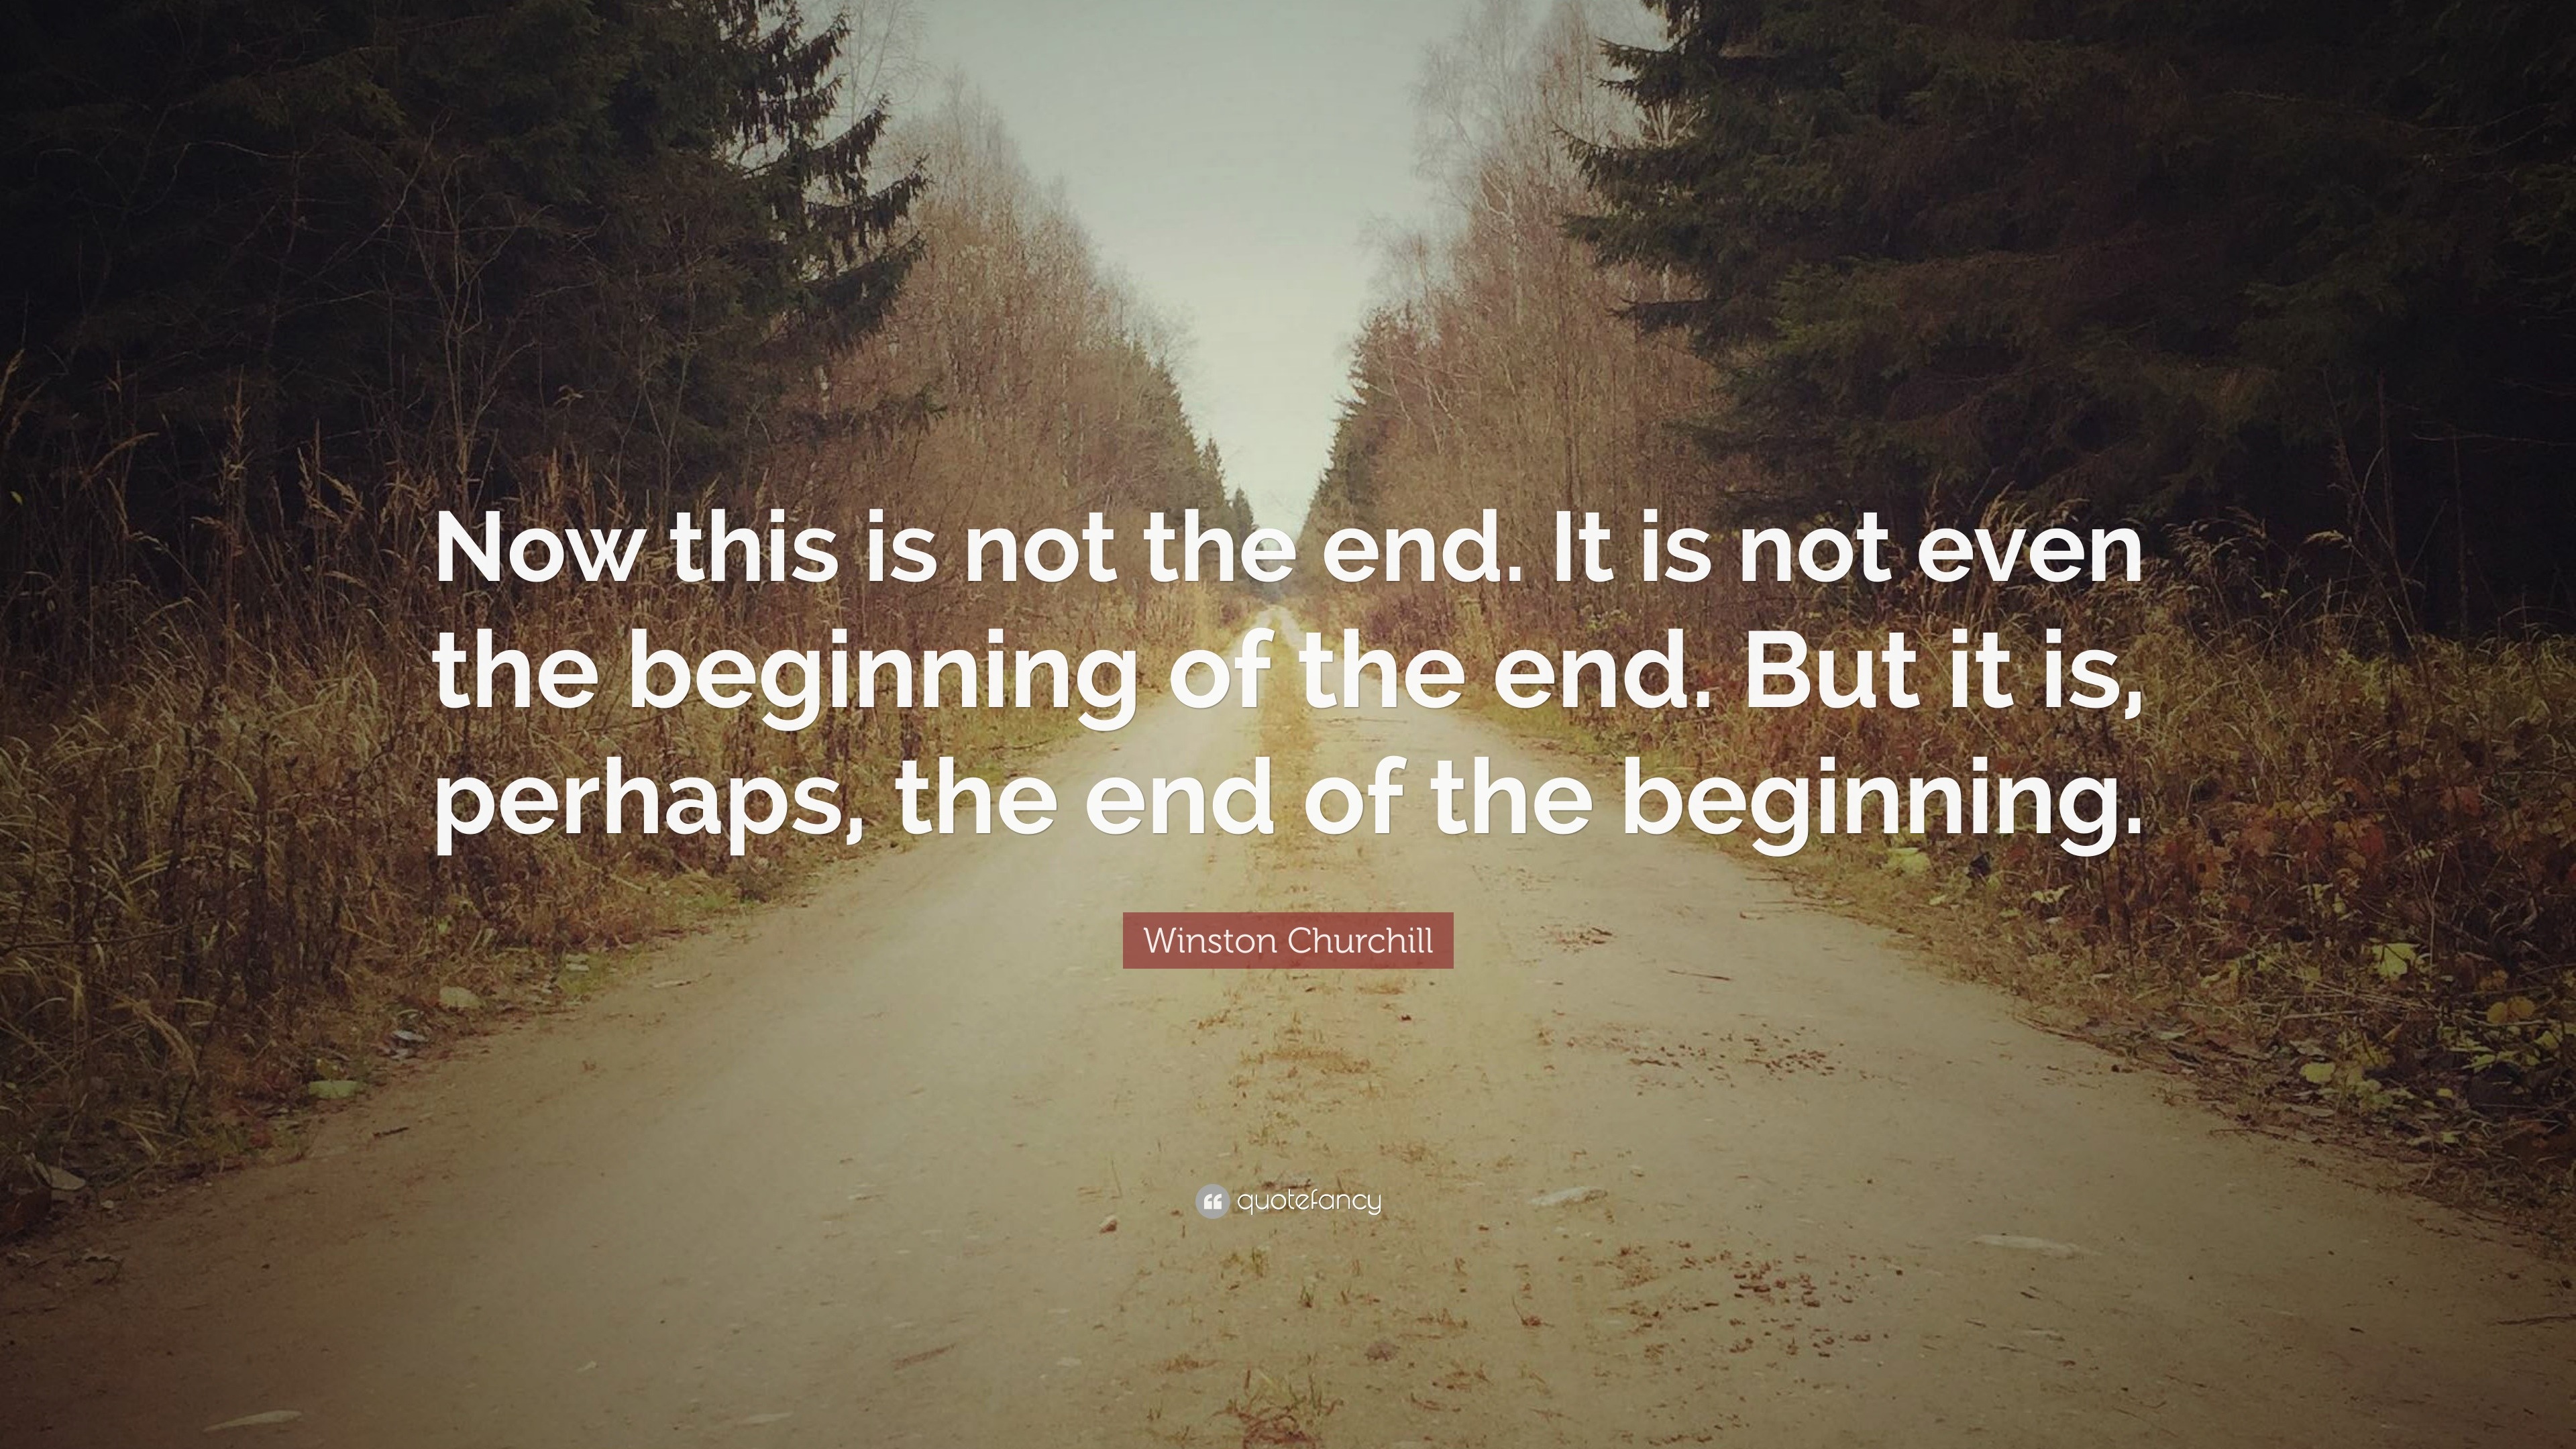 Quotes about endings and new beginnings - rackfiln